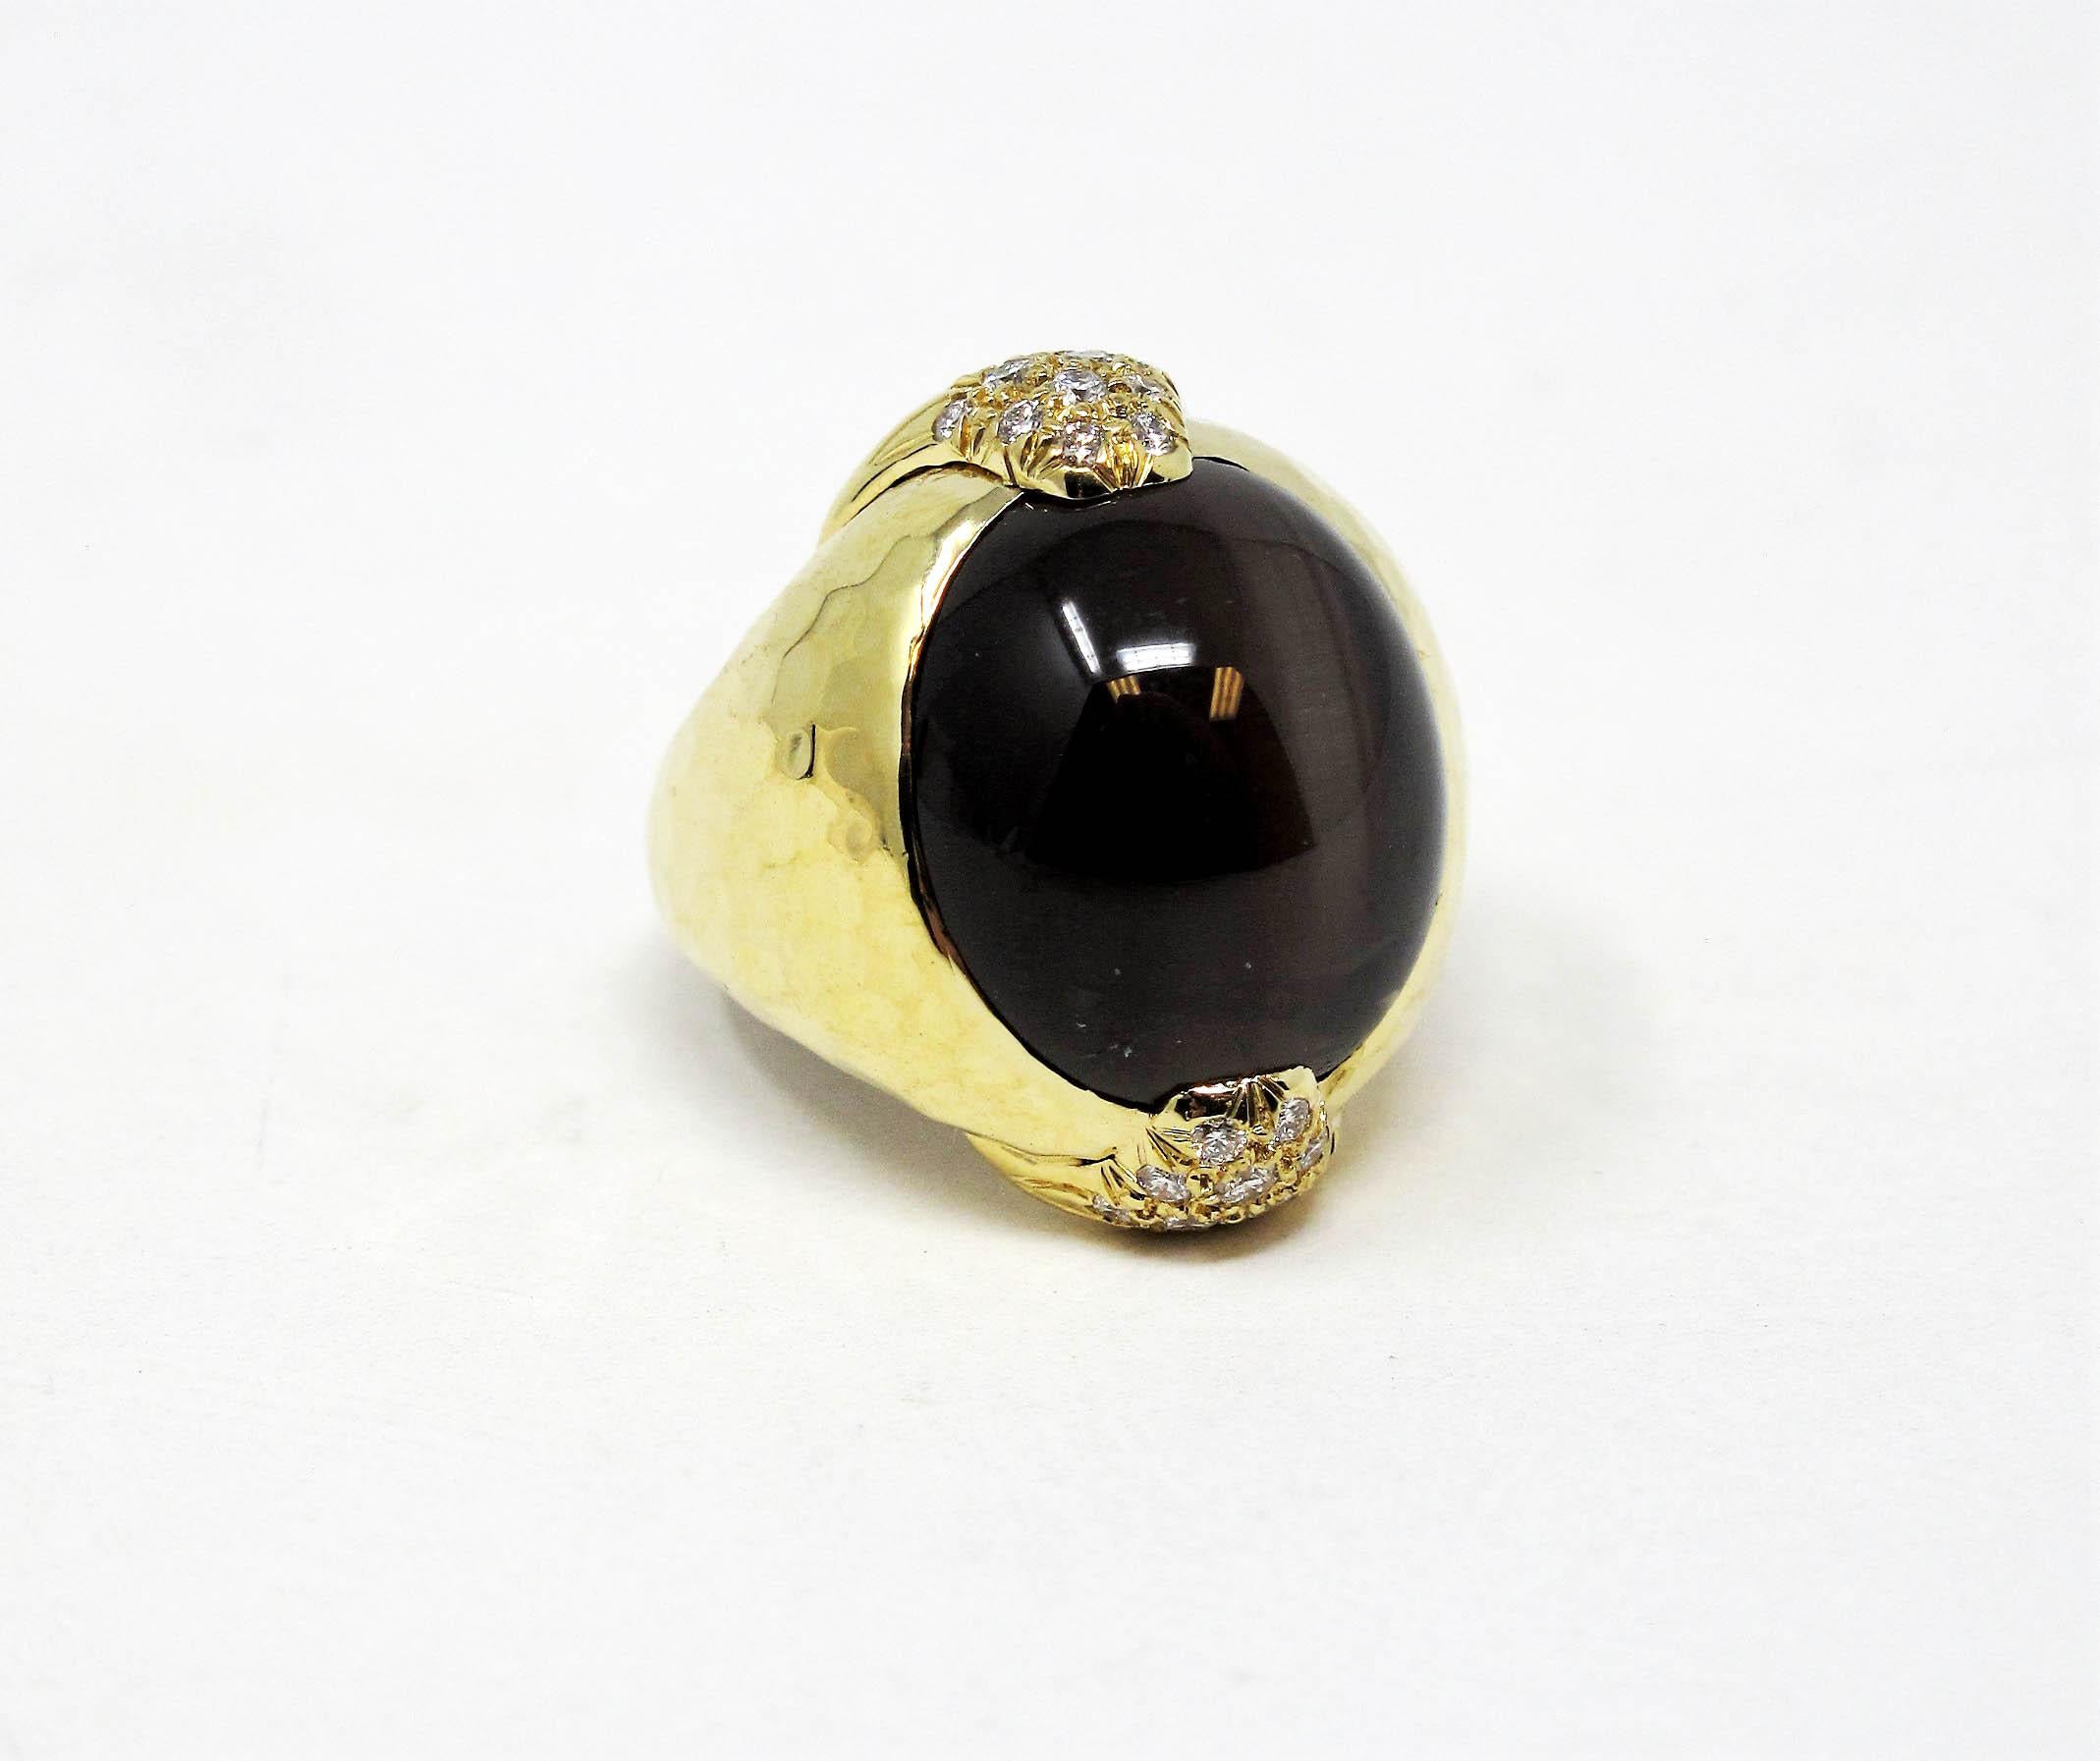 This absolutely gorgeous contemporary cat's eye sillimanite and diamond dome ring made by Henry Dunay will be you new signature piece. Adorn your finger with this stunning cabochon cut medium brown stone with unique cat's eye characteristics that